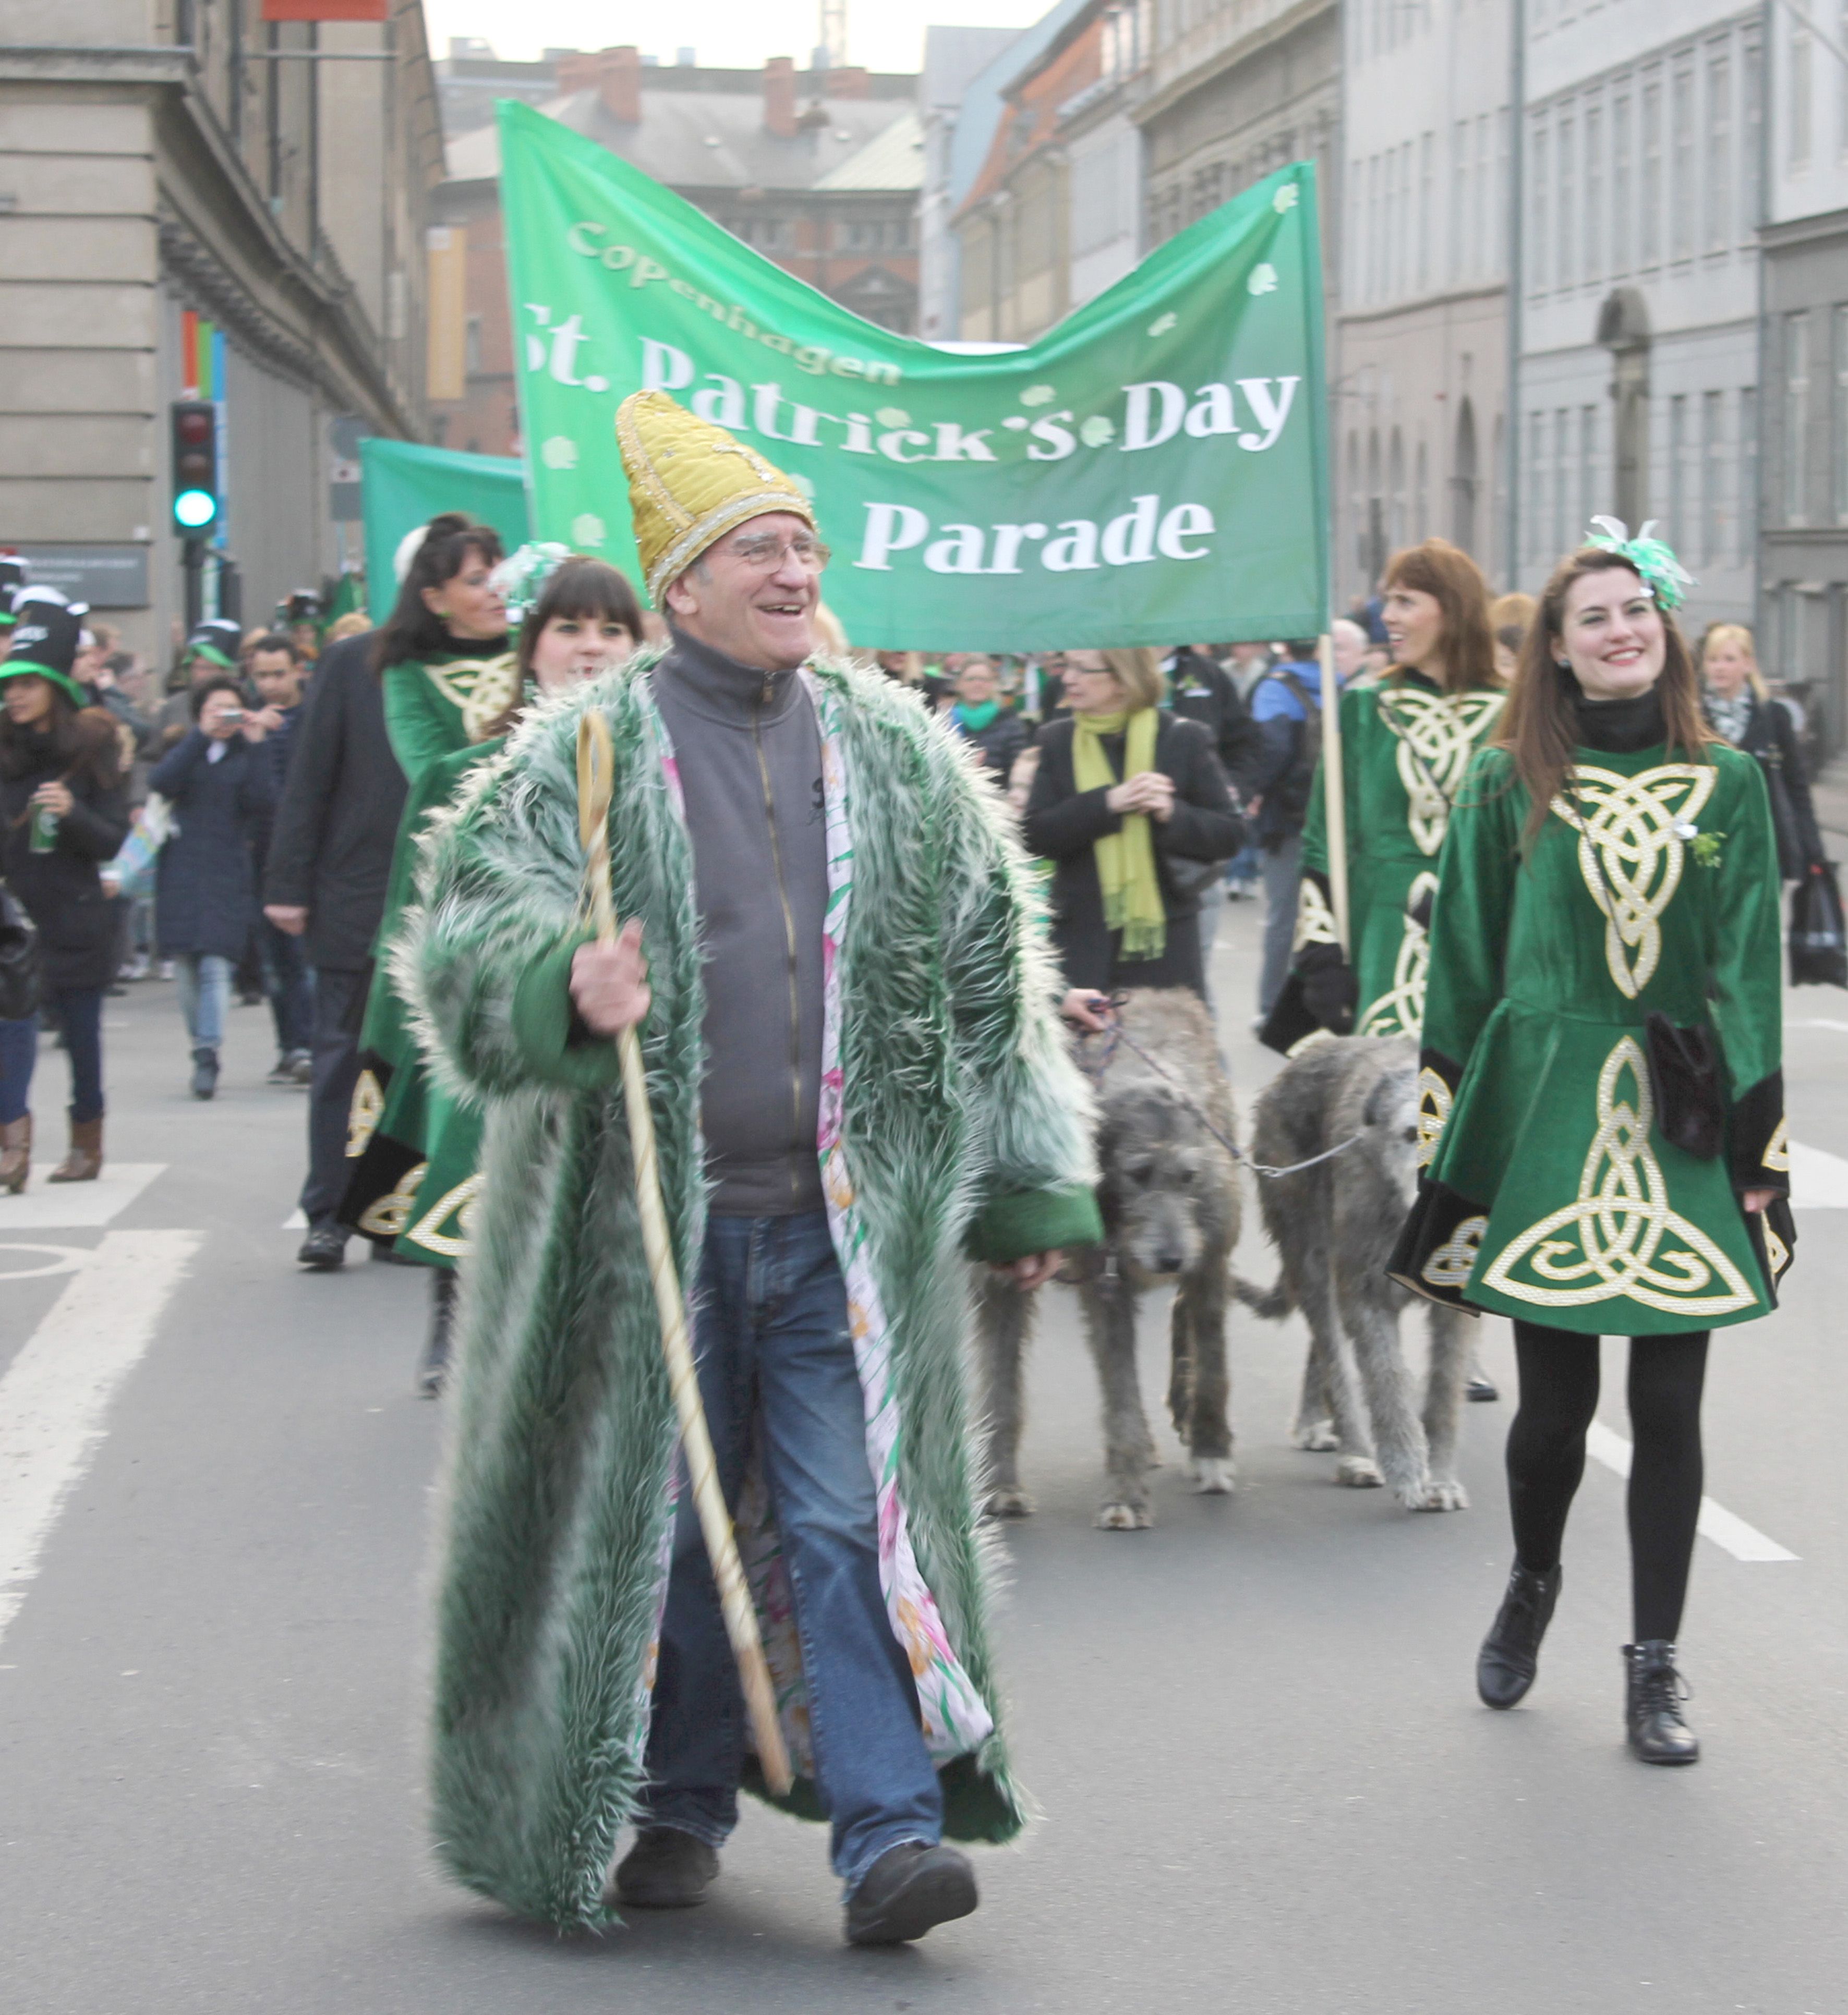 Everyone’s welcome at the St Patrick’s Day Parade!